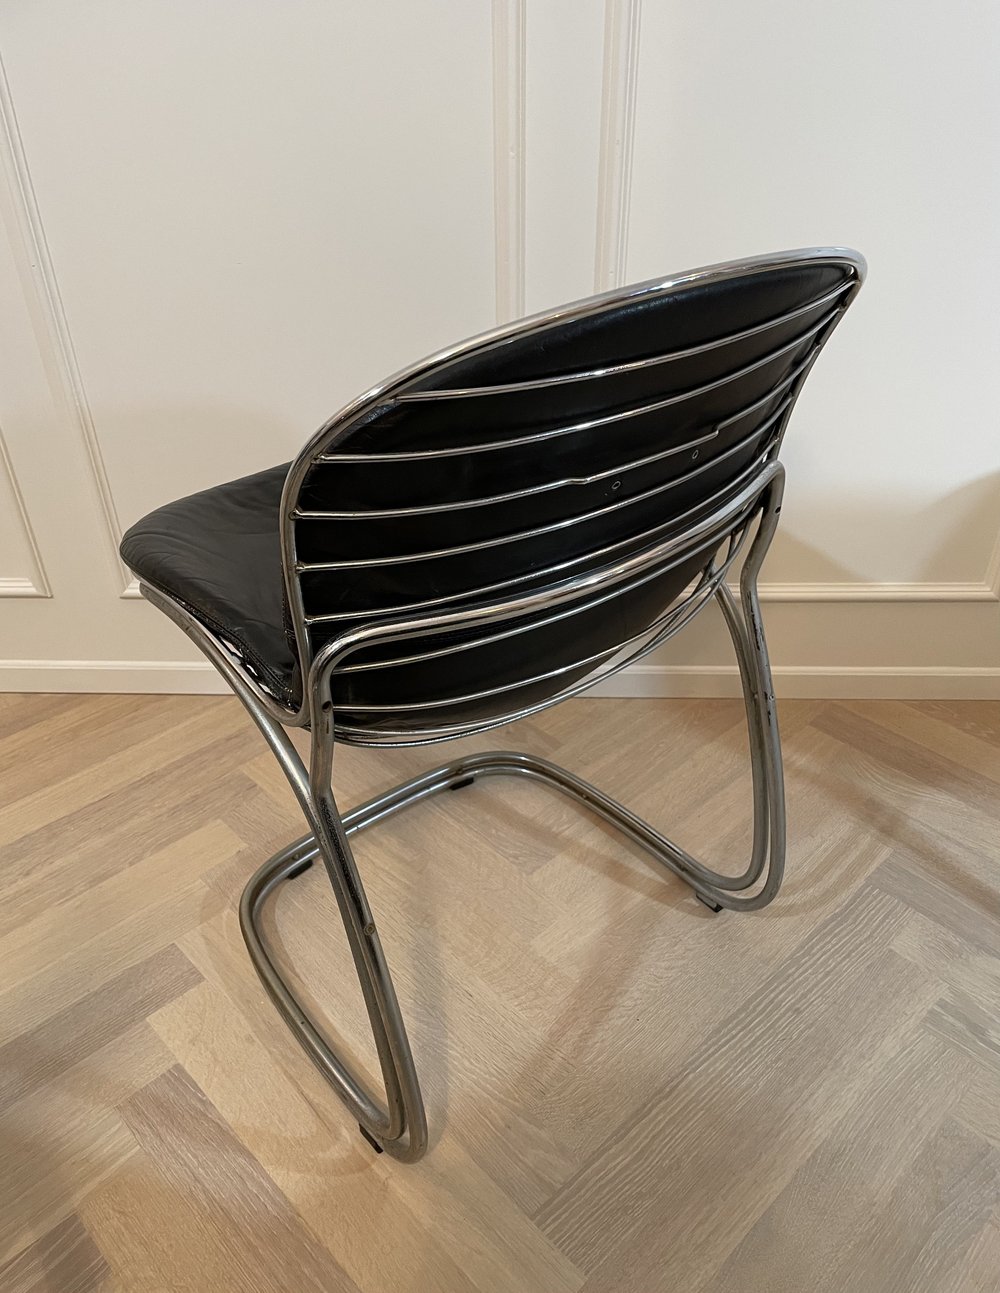 Charlotte Perriand, Manège, Croatie (1937), Available for Sale